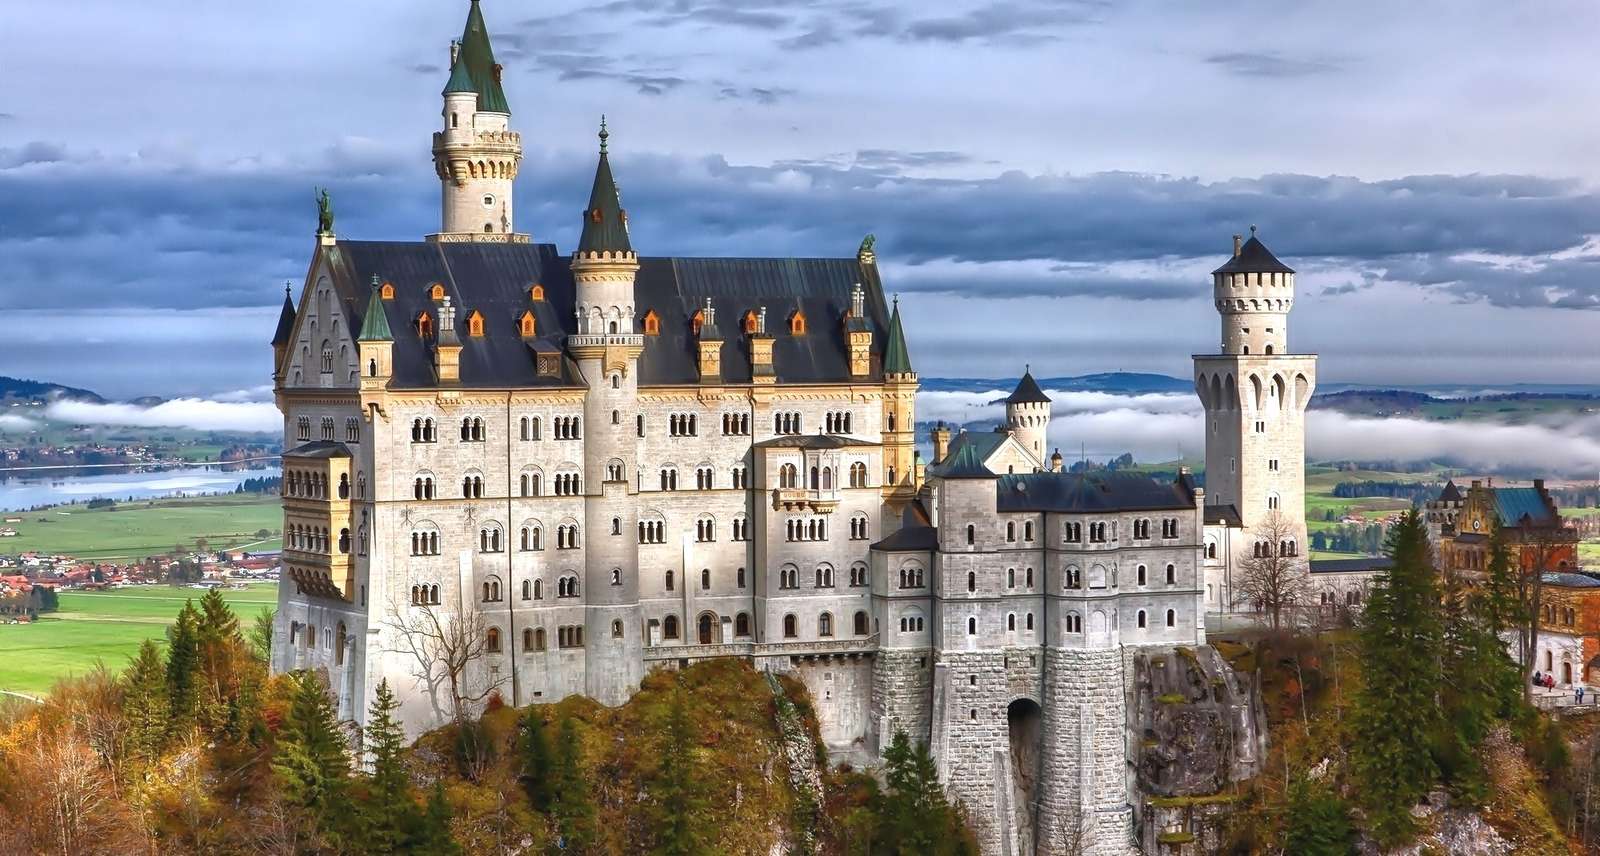 Old castle jigsaw puzzle online